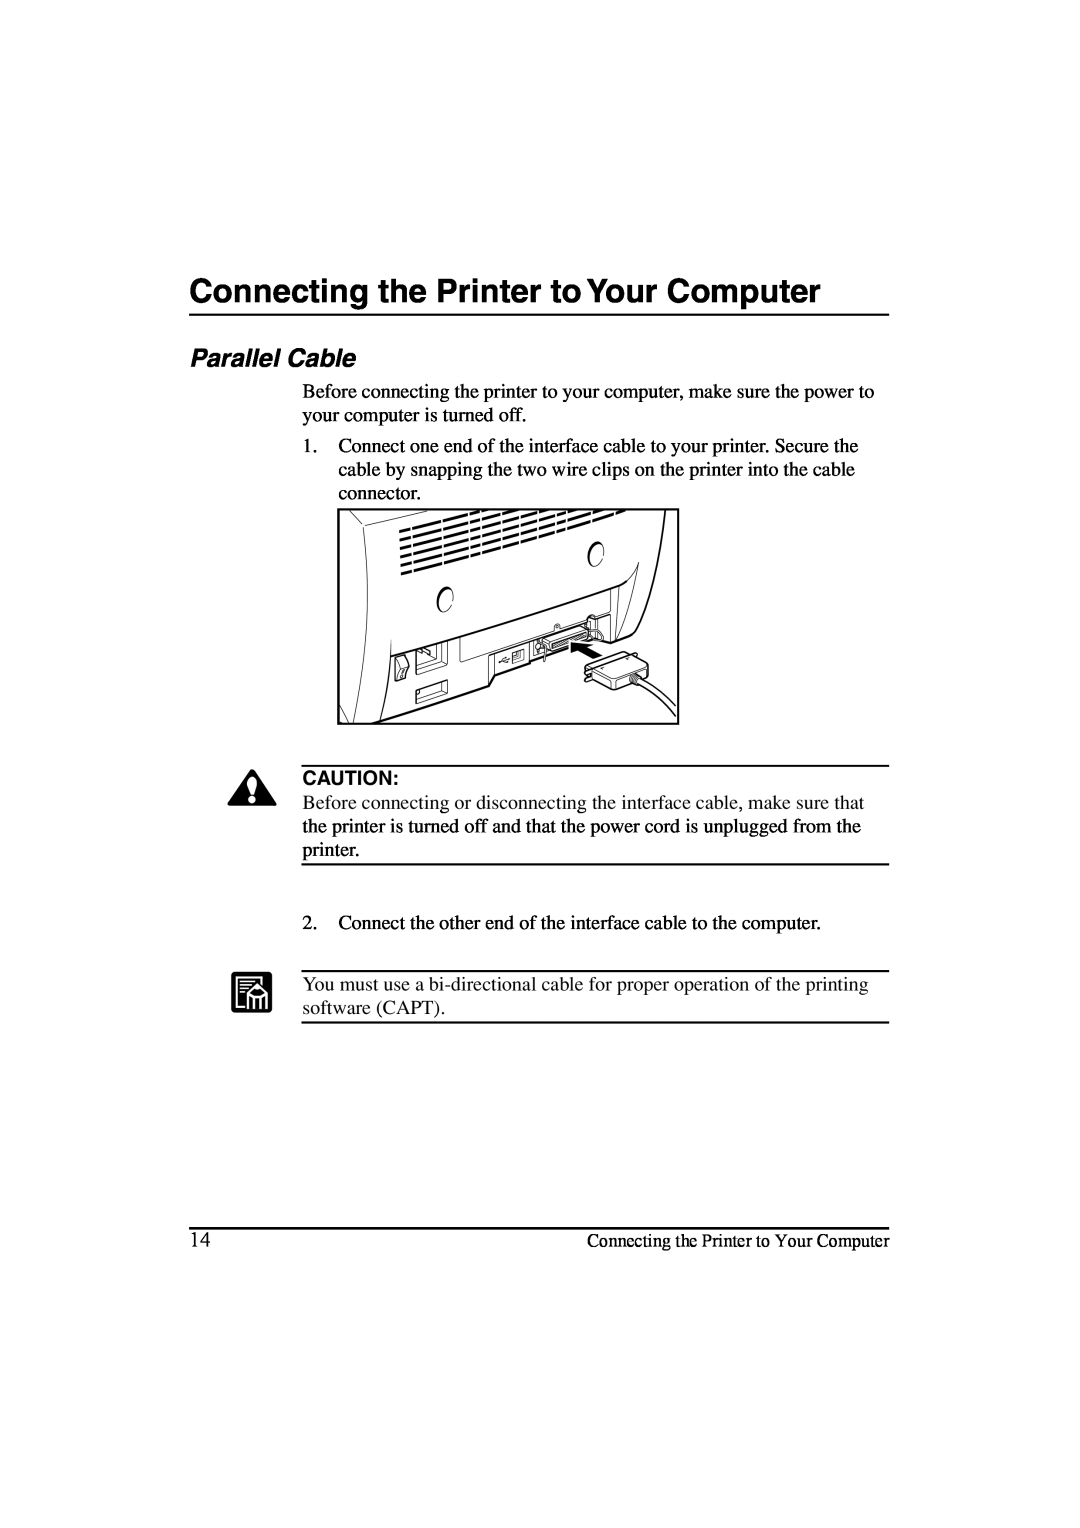 Canon LBP-810 manual Connecting the Printer to Your Computer, Parallel Cable 